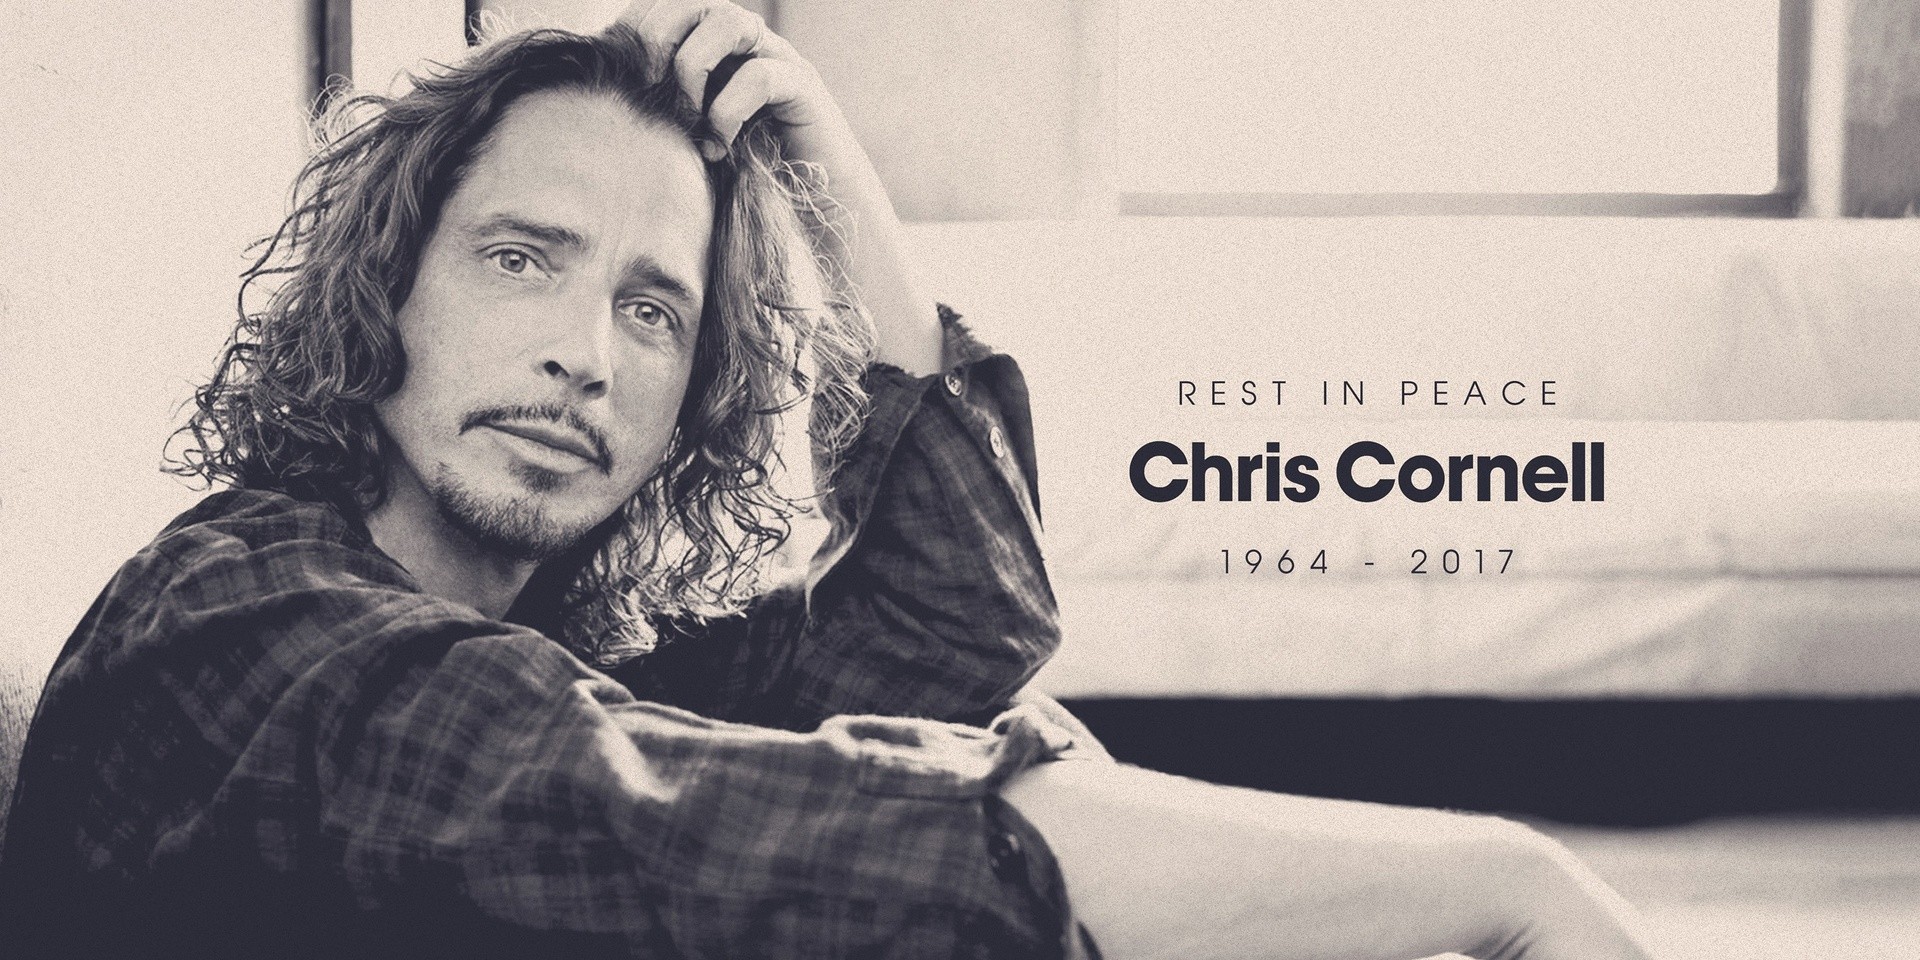 Singaporean musicians reflect on Chris Cornell and his impact